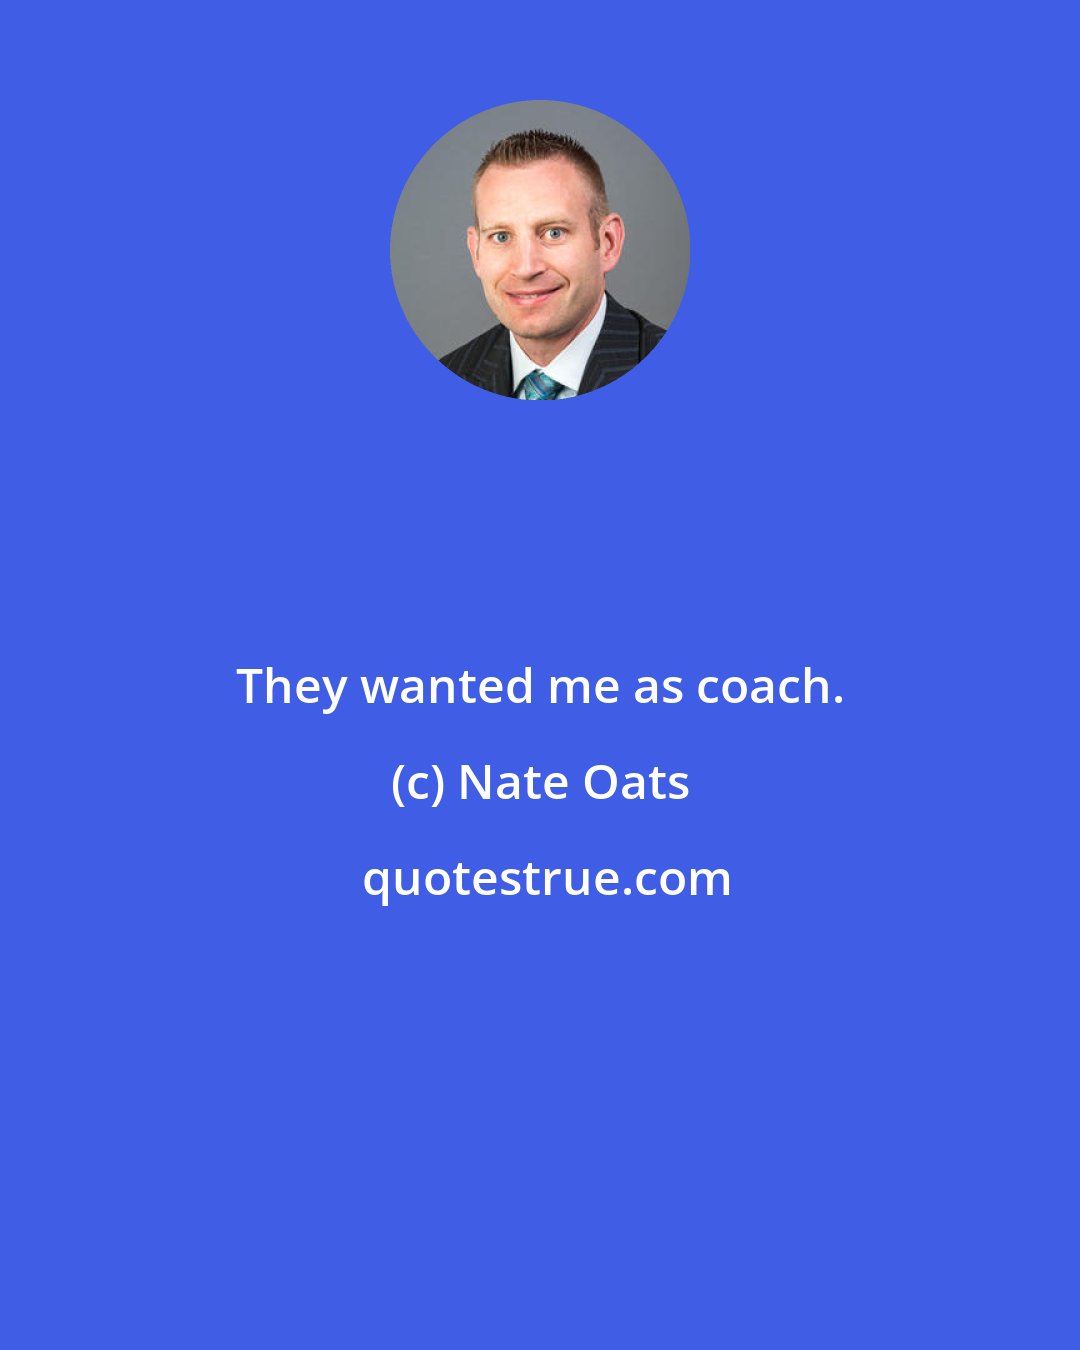 Nate Oats: They wanted me as coach.